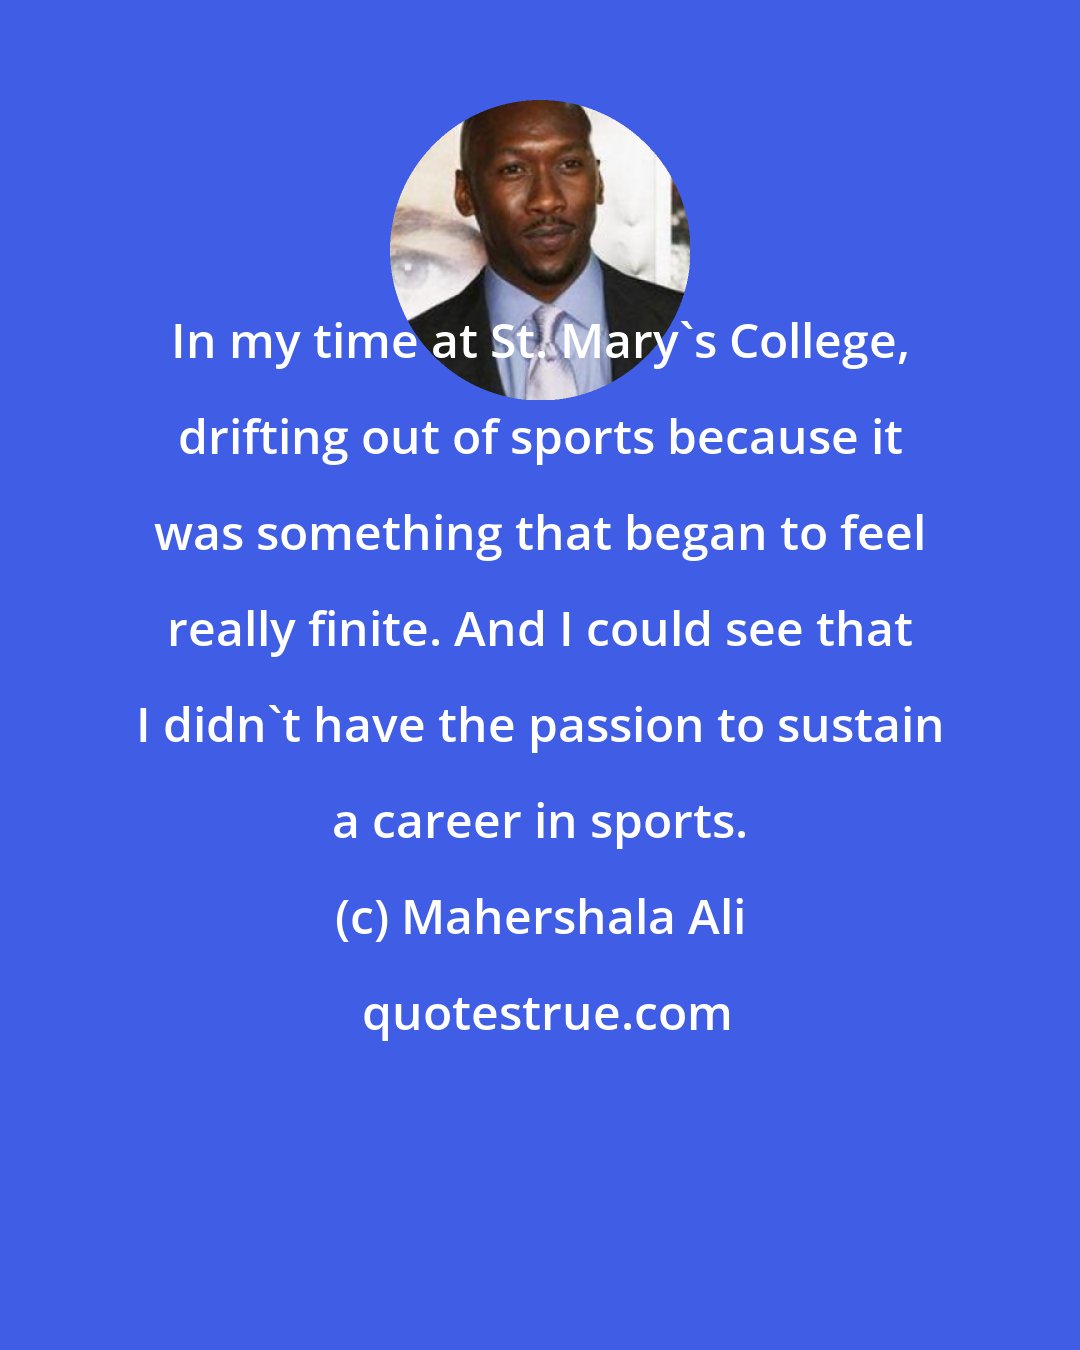 Mahershala Ali: In my time at St. Mary's College, drifting out of sports because it was something that began to feel really finite. And I could see that I didn't have the passion to sustain a career in sports.